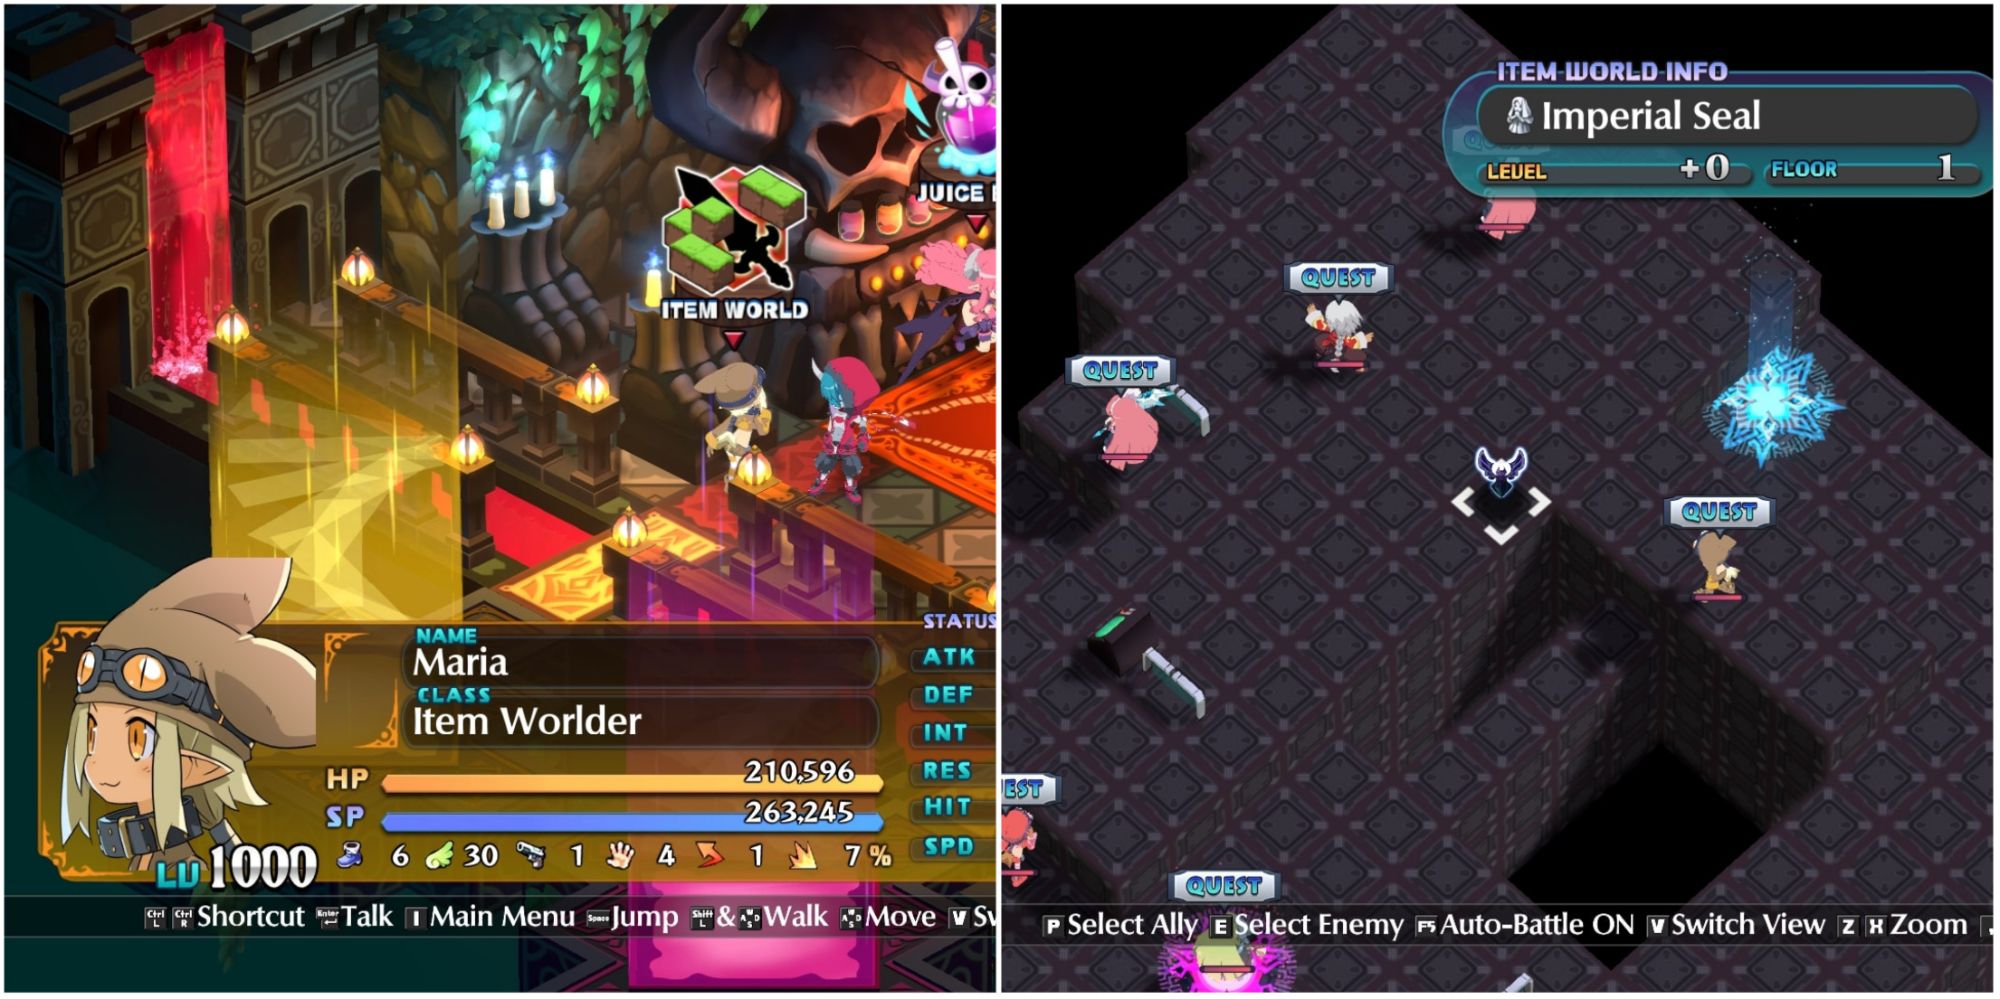 Guide To The Item World In Disgaea 6